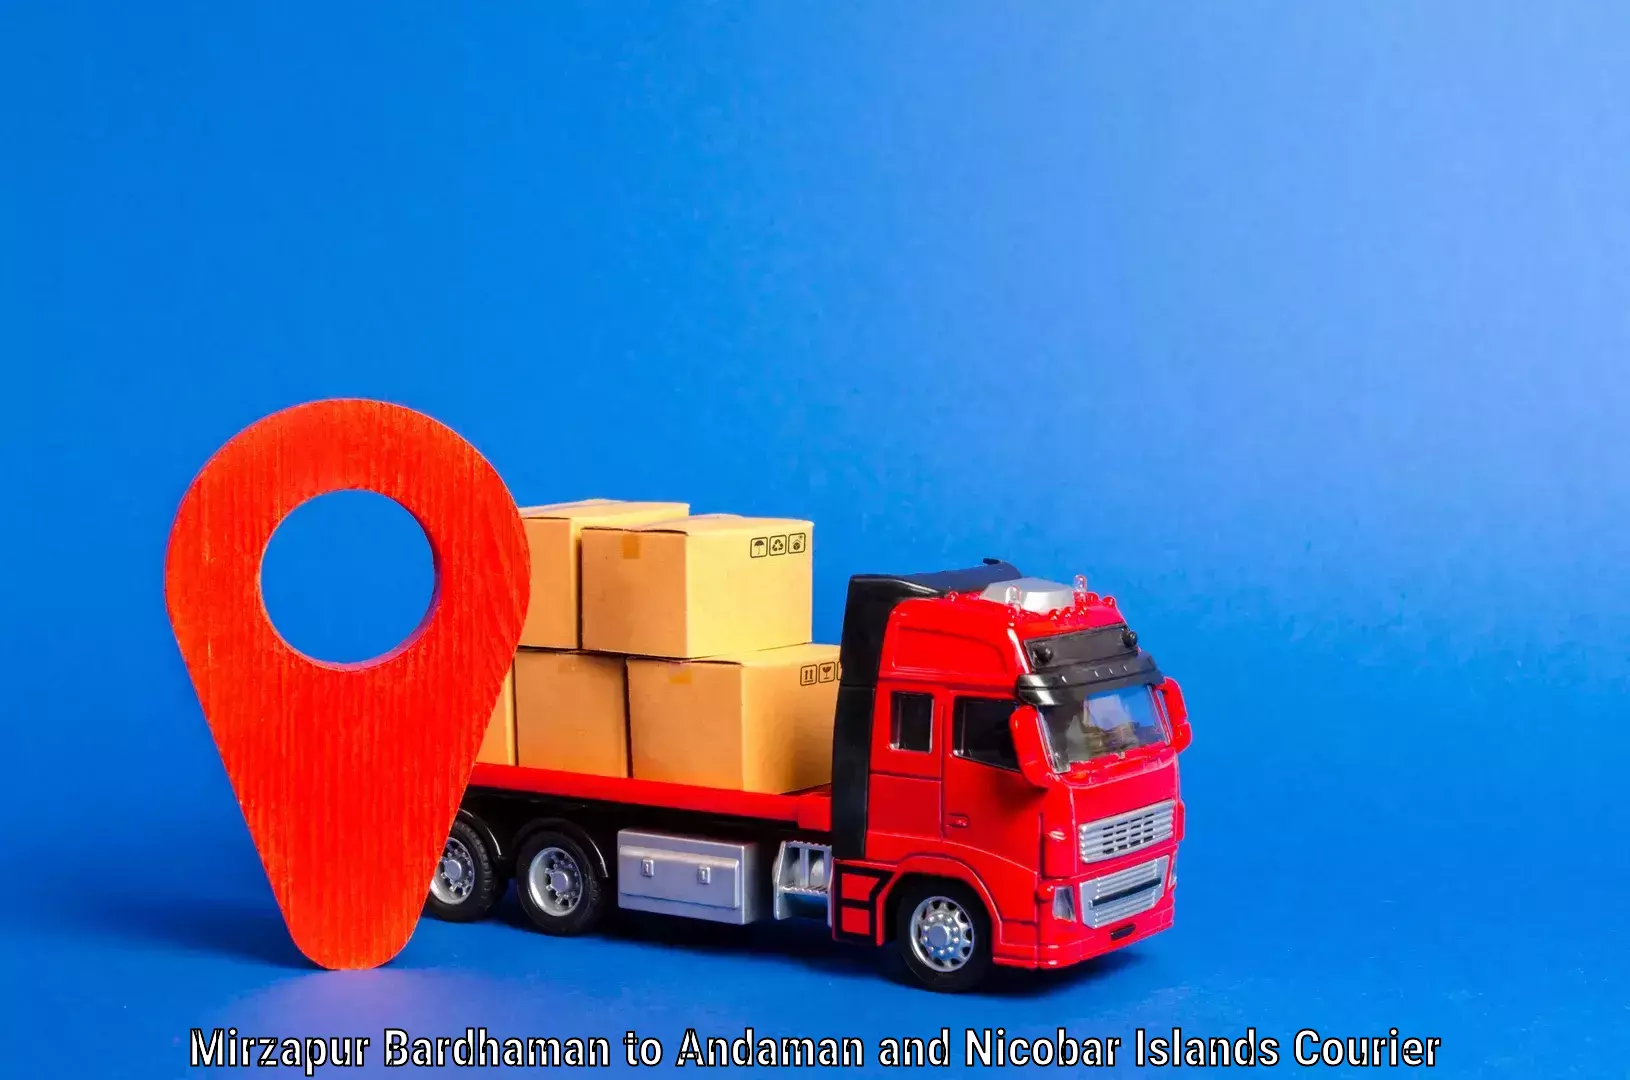 Quality moving services Mirzapur Bardhaman to Andaman and Nicobar Islands